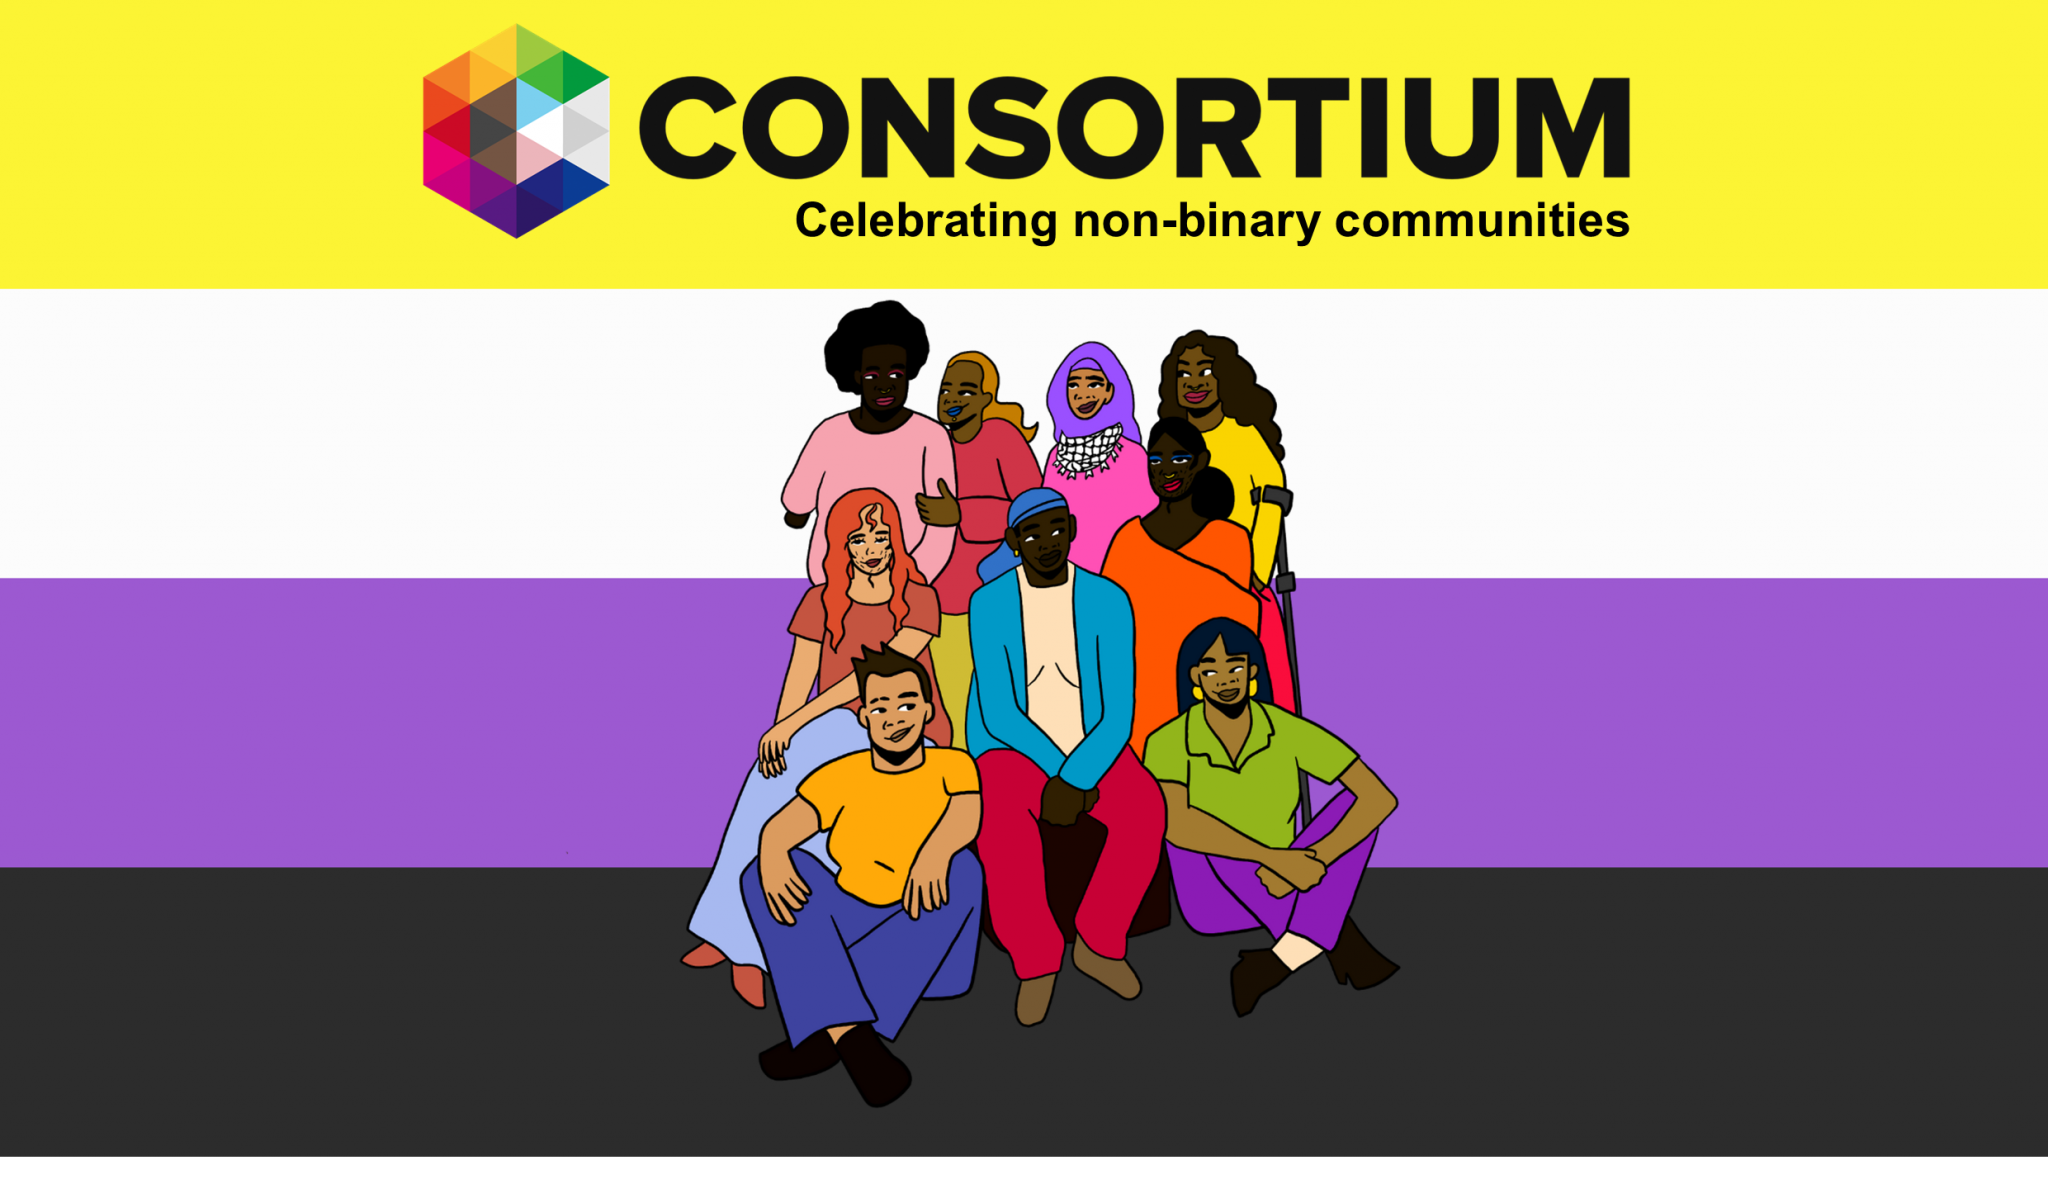 Happy International NonBinary People’s Day 2021!